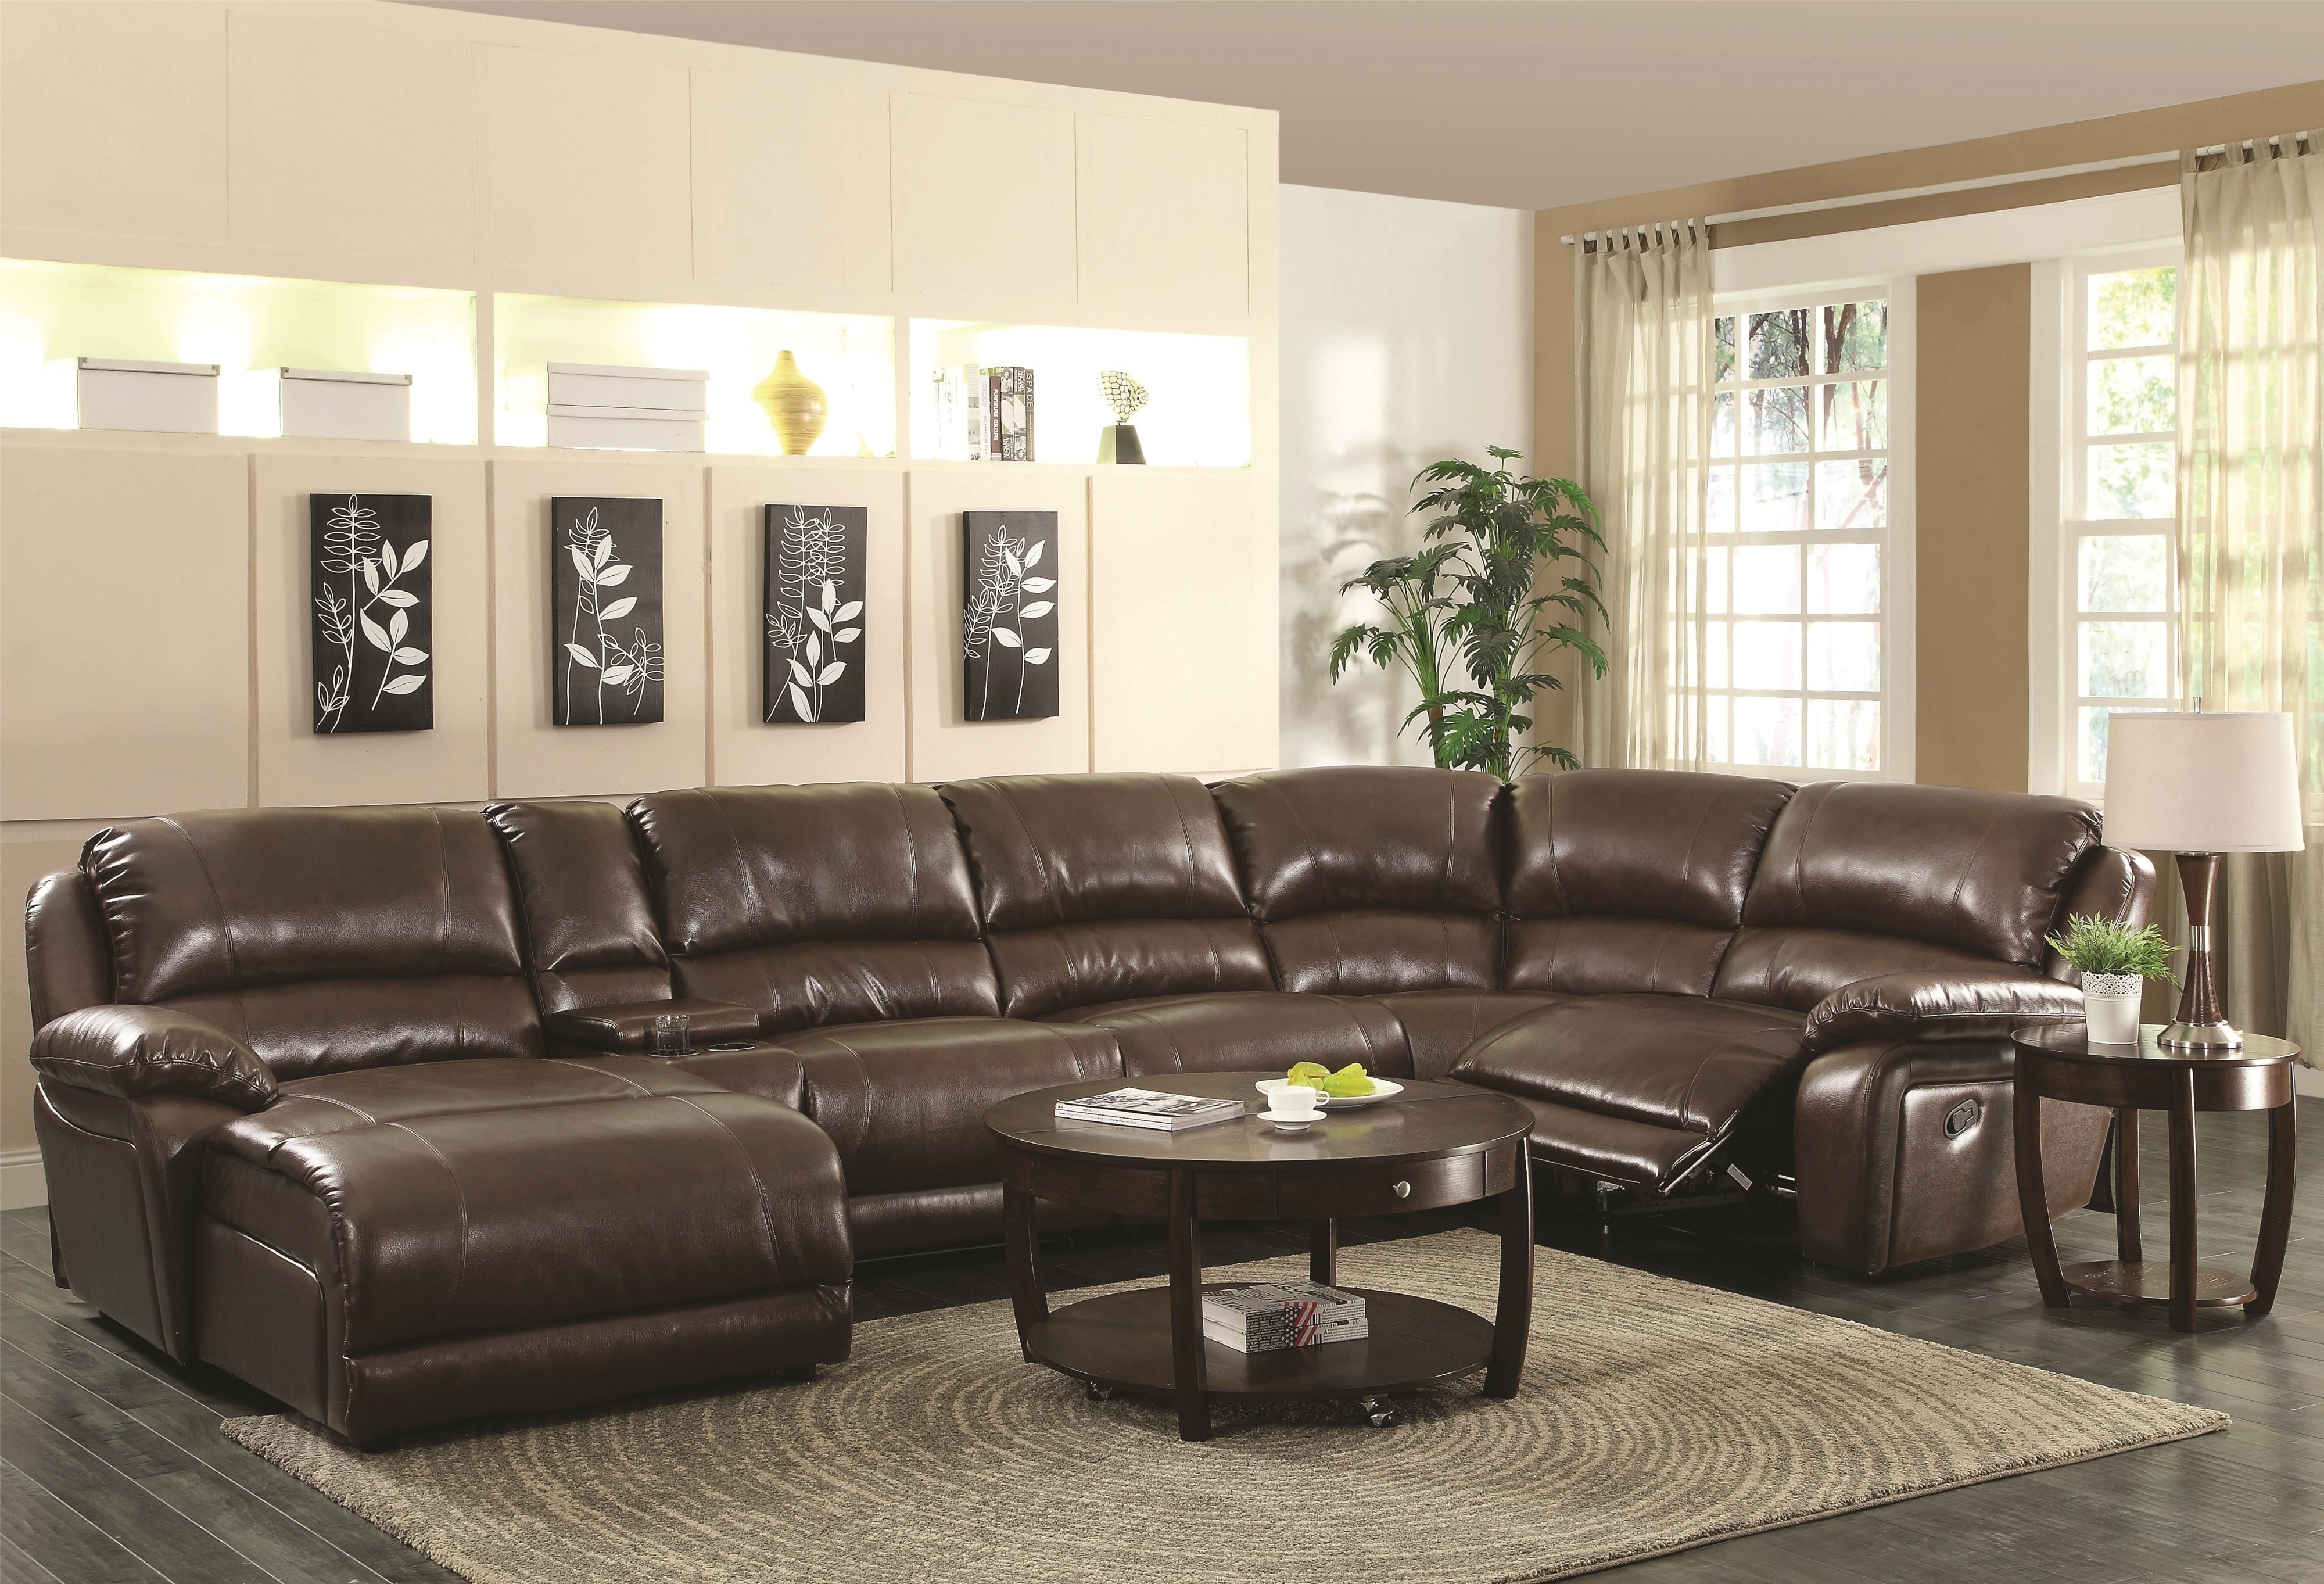 Coaster Mackenzie Chestnut 6 Piece Reclining Sectional Sofa With With Regard To 6 Piece Leather Sectional Sofa 